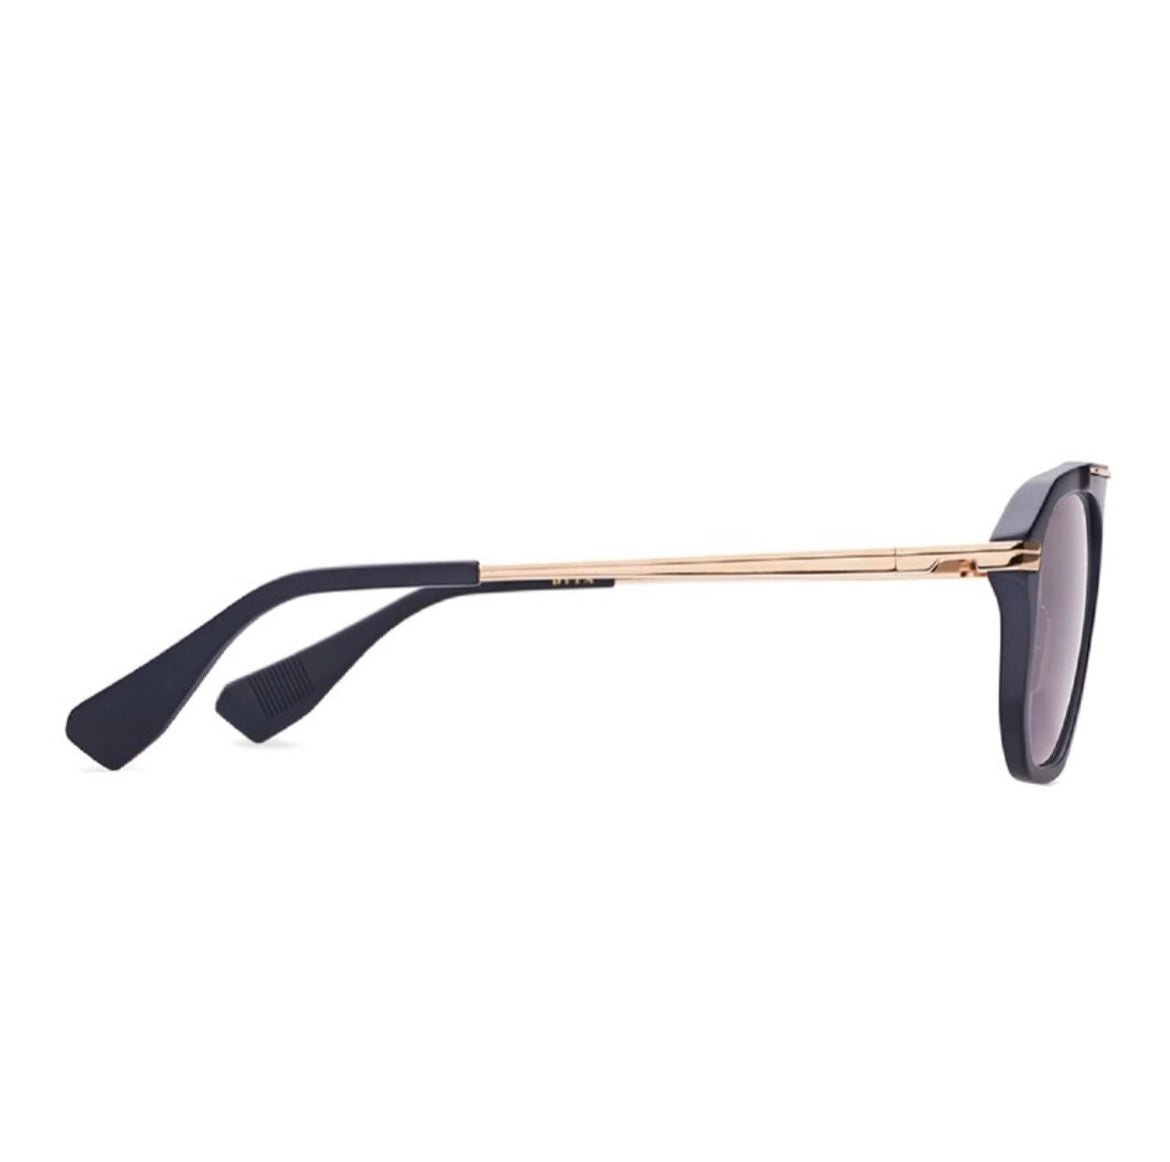 A pair of DITA TERRACRAFT DTS416-A-01 sunglasses with a gold frame and black lenses.